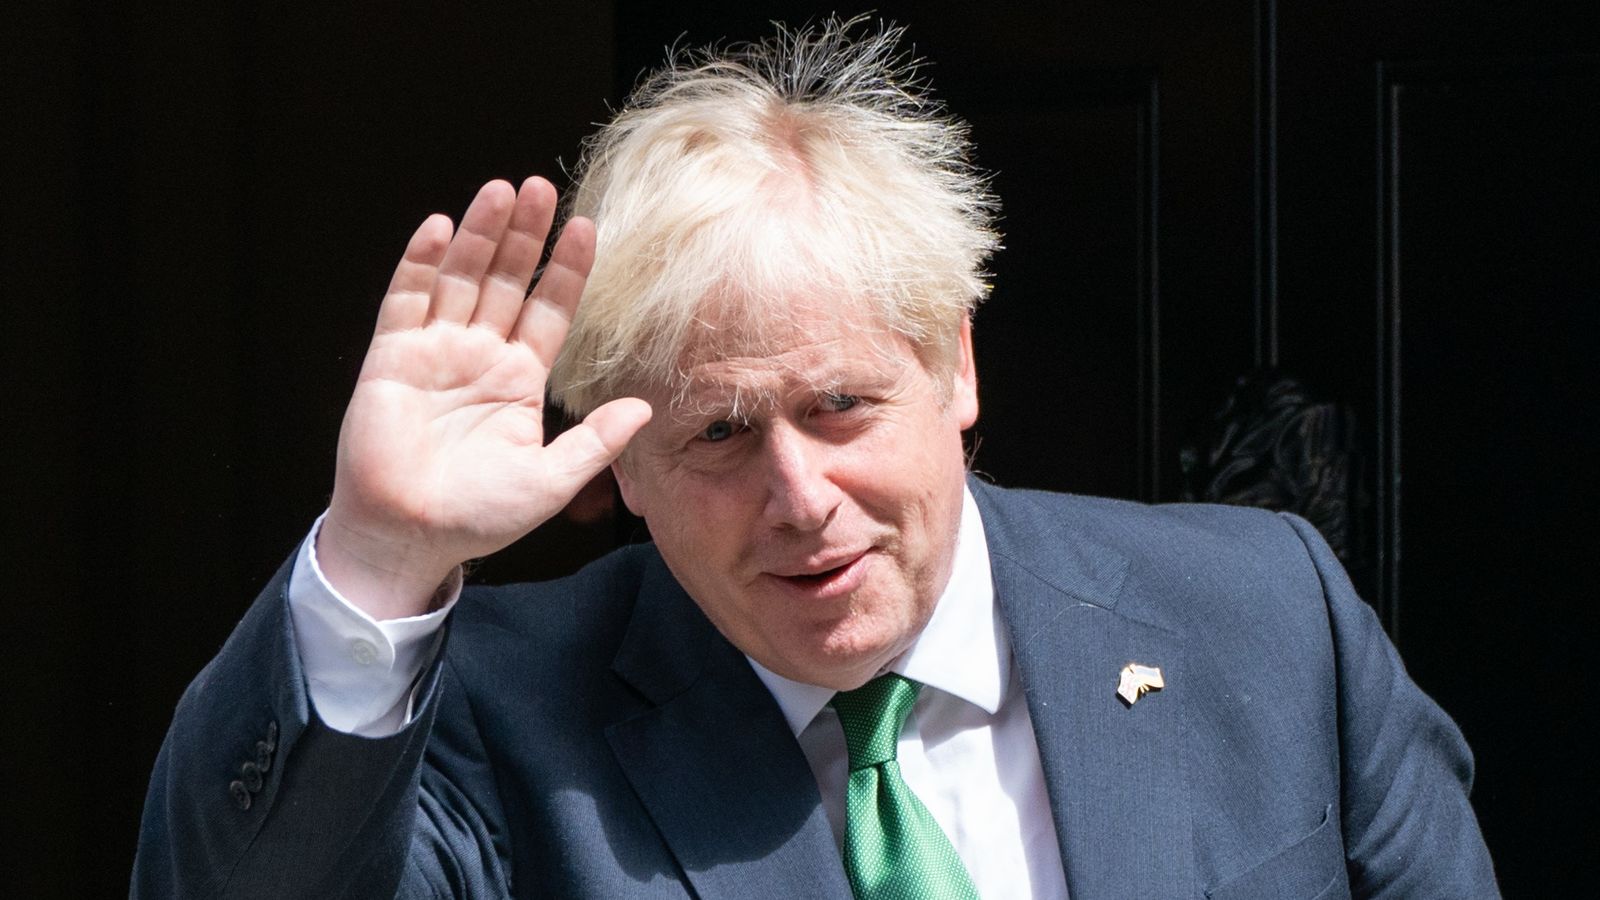 Boris Johnson's conduct criticised in review calling for constitutional reform 